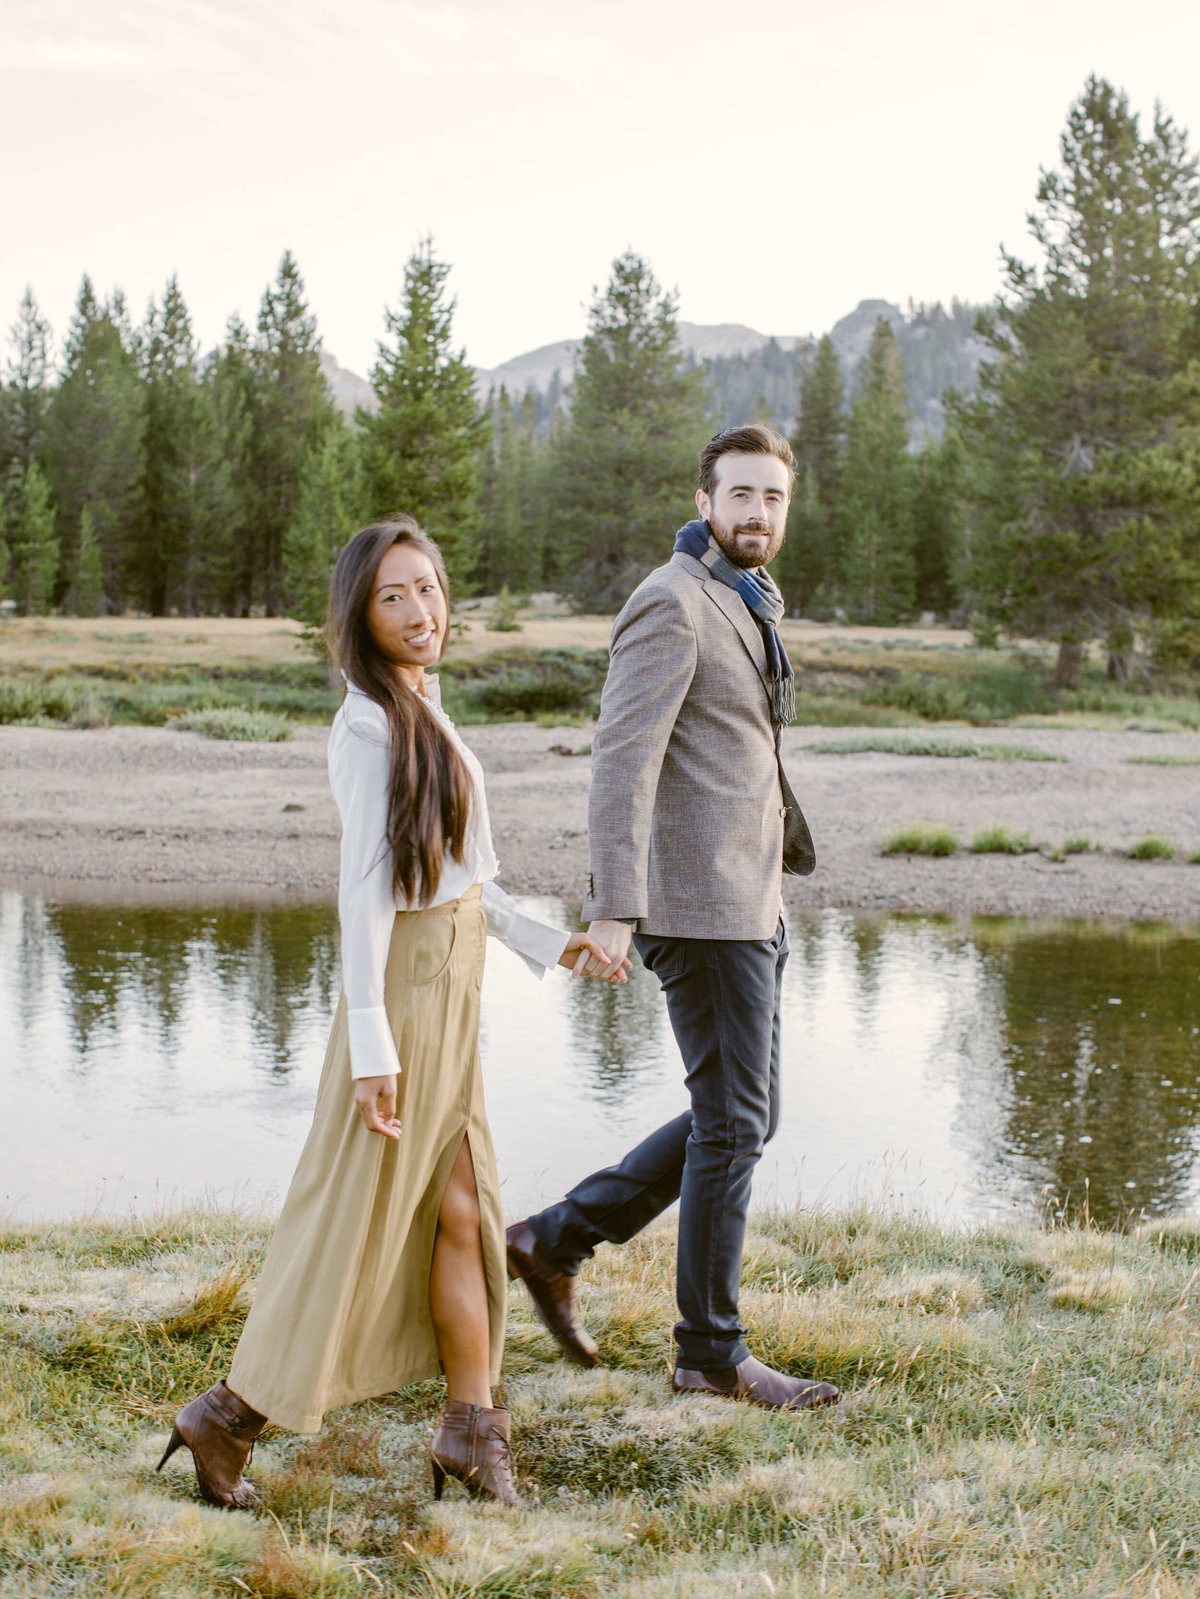 20-KTMerry-engagement-session-outdoor-Yosemite-national-park